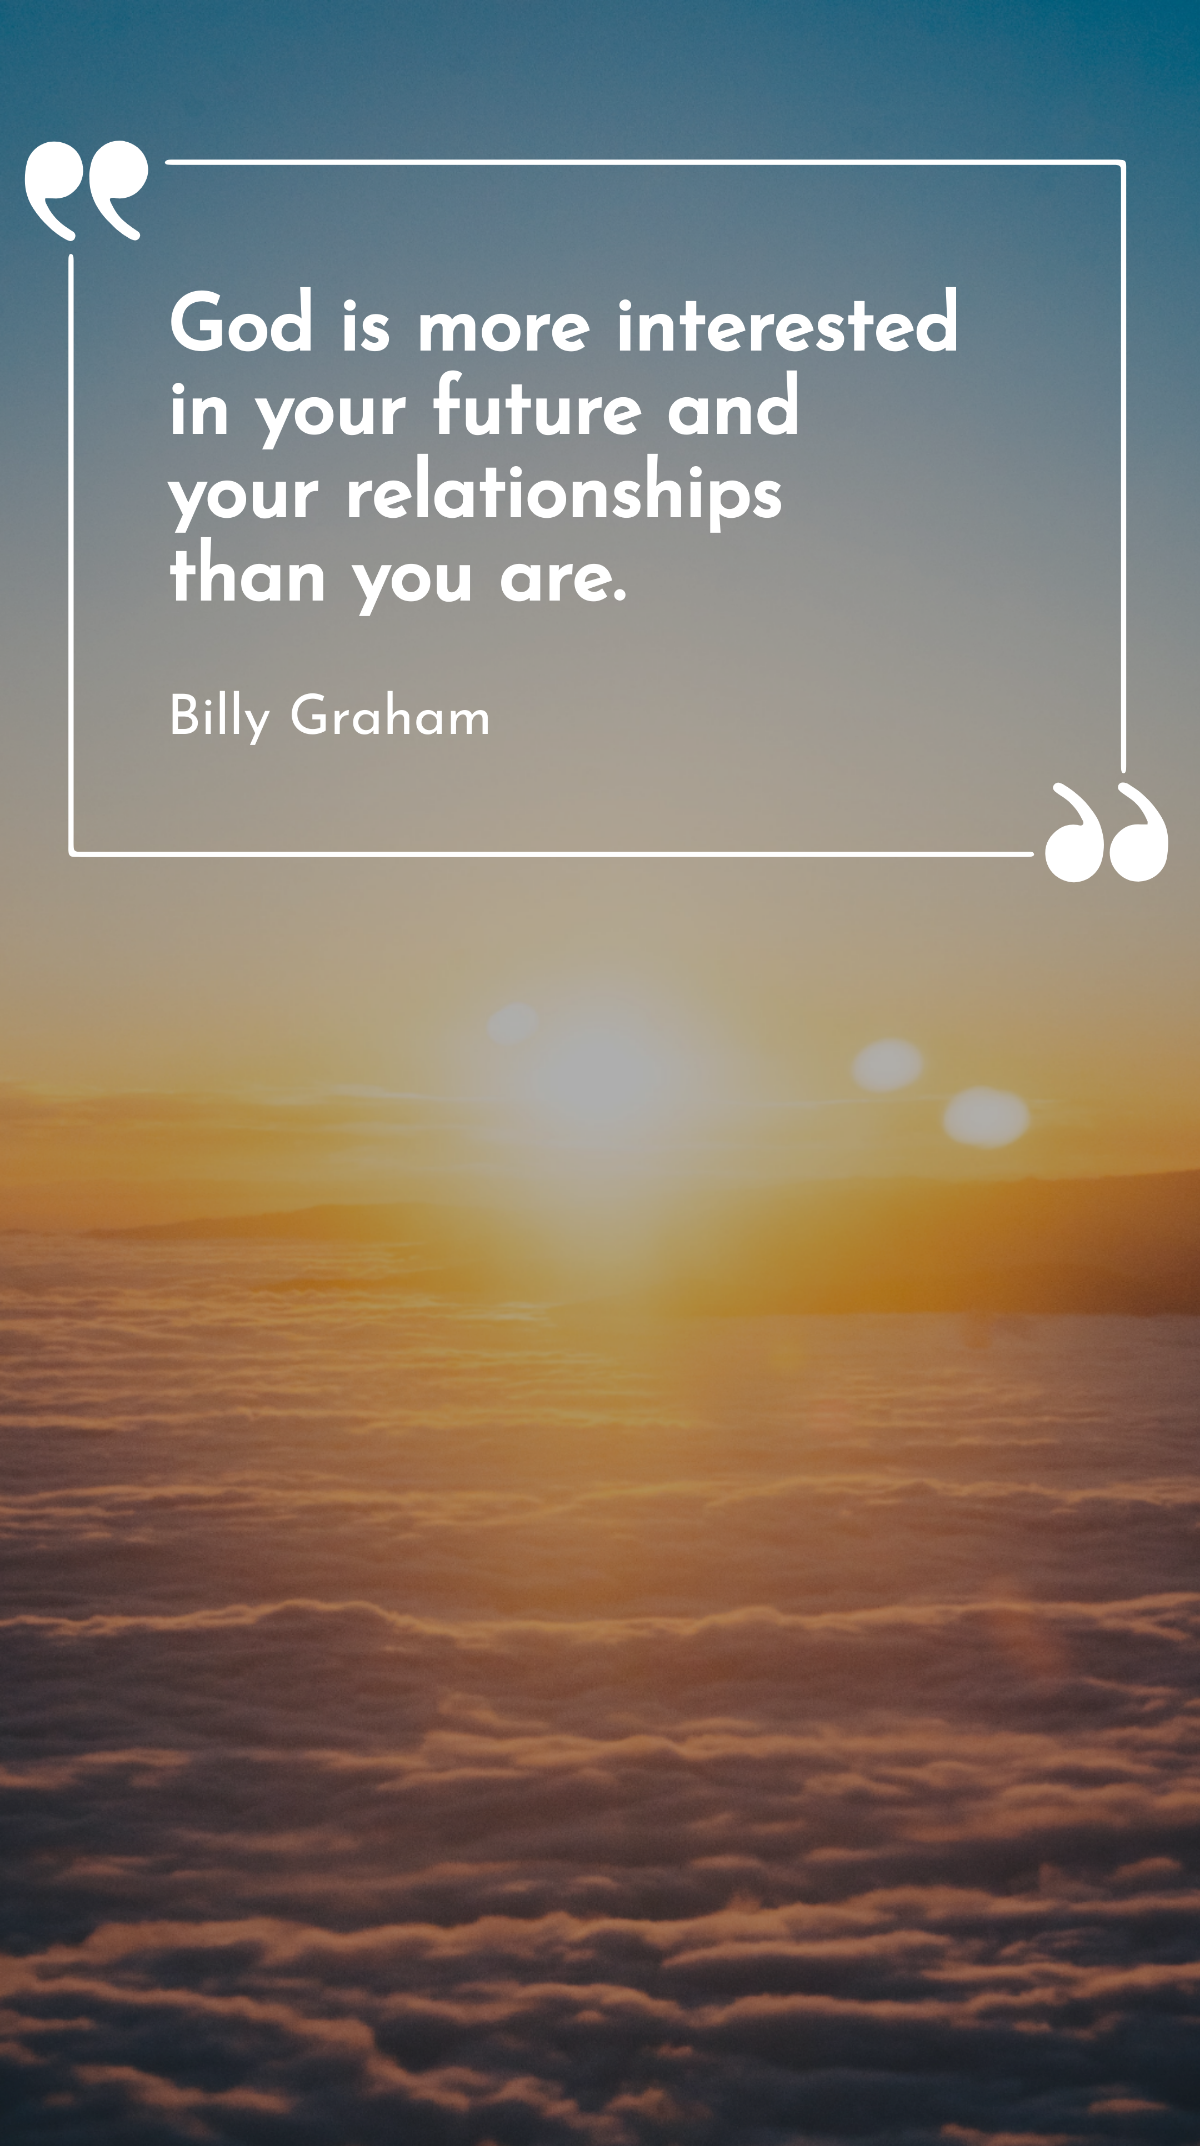 Billy Graham - God is more interested in your future and your relationships than you are. Template